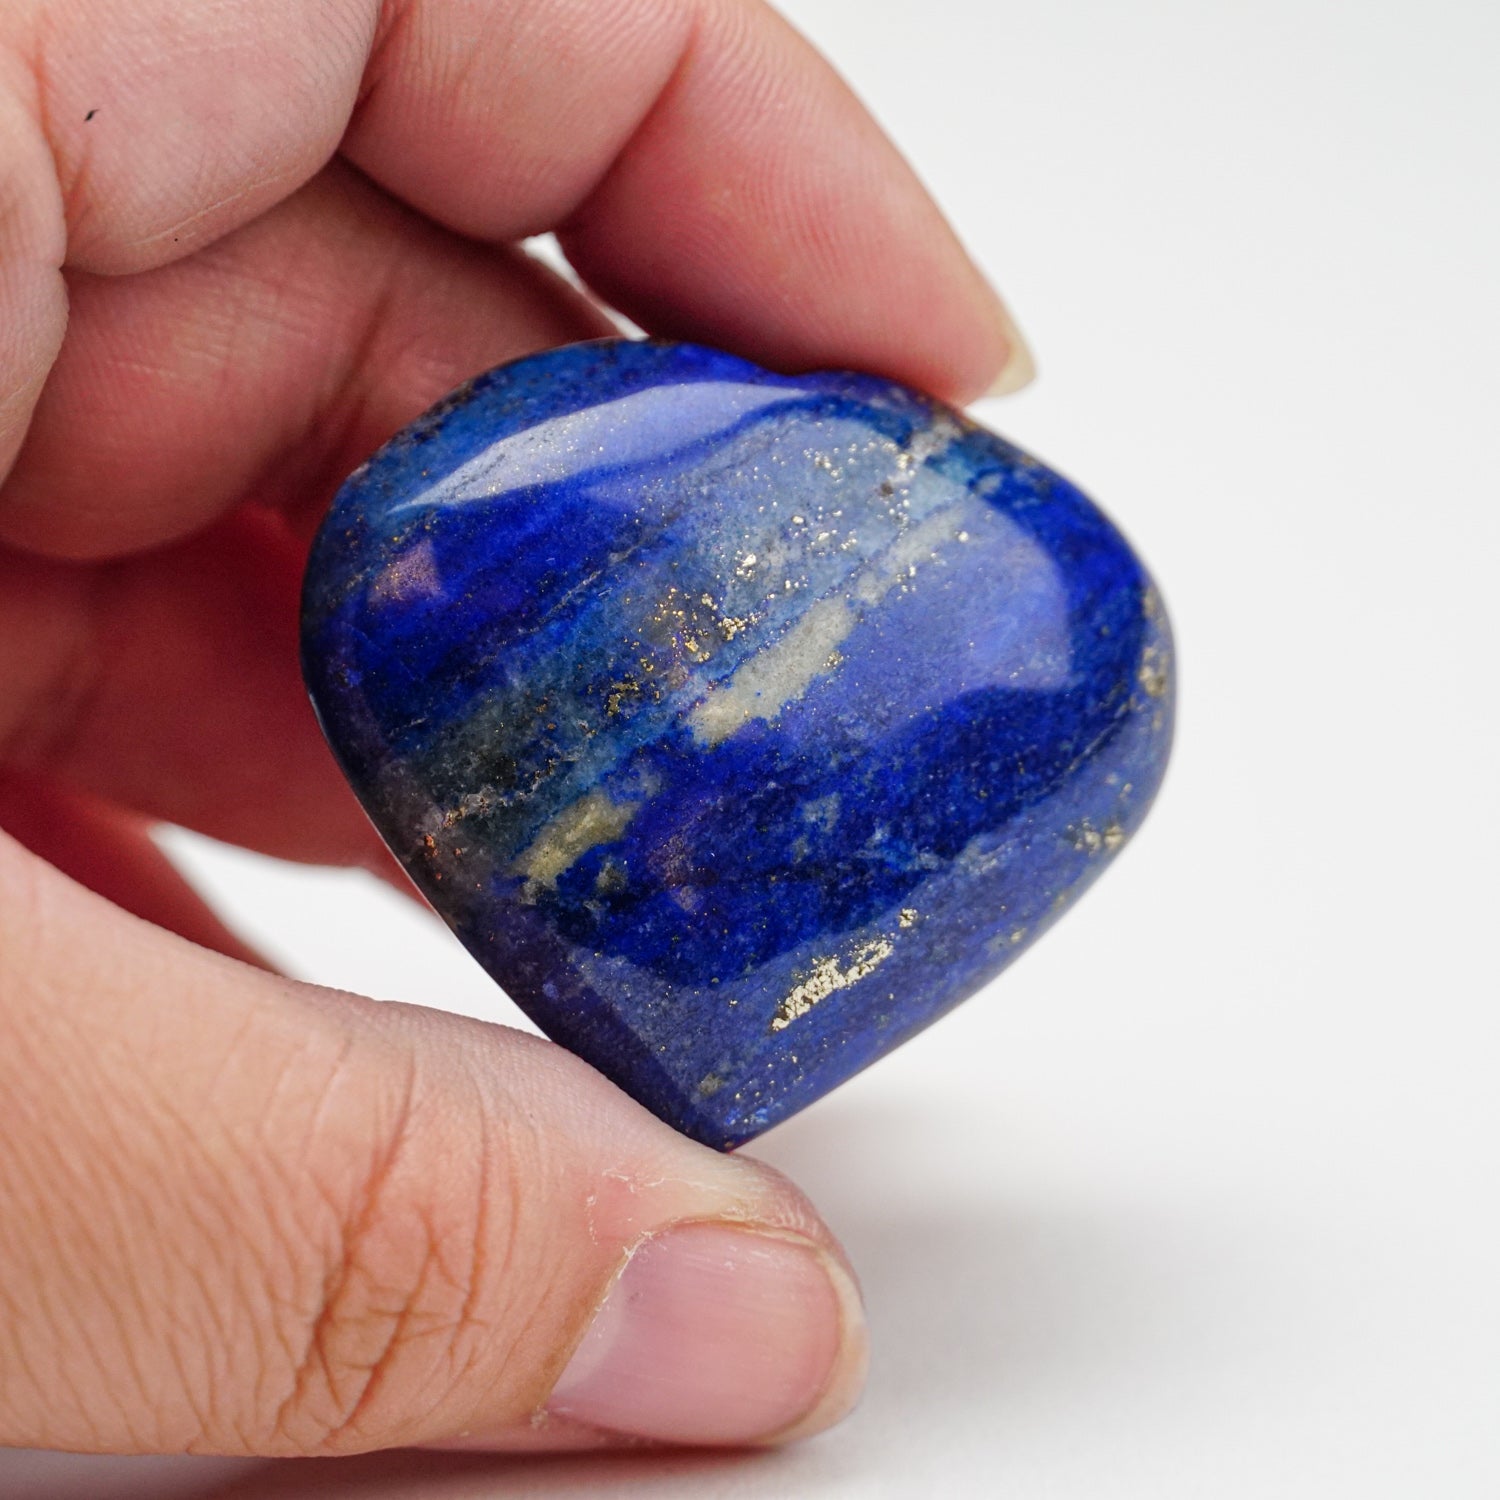 Polished Lapis Lazuli Heart from Afghanistan (36.8 grams)